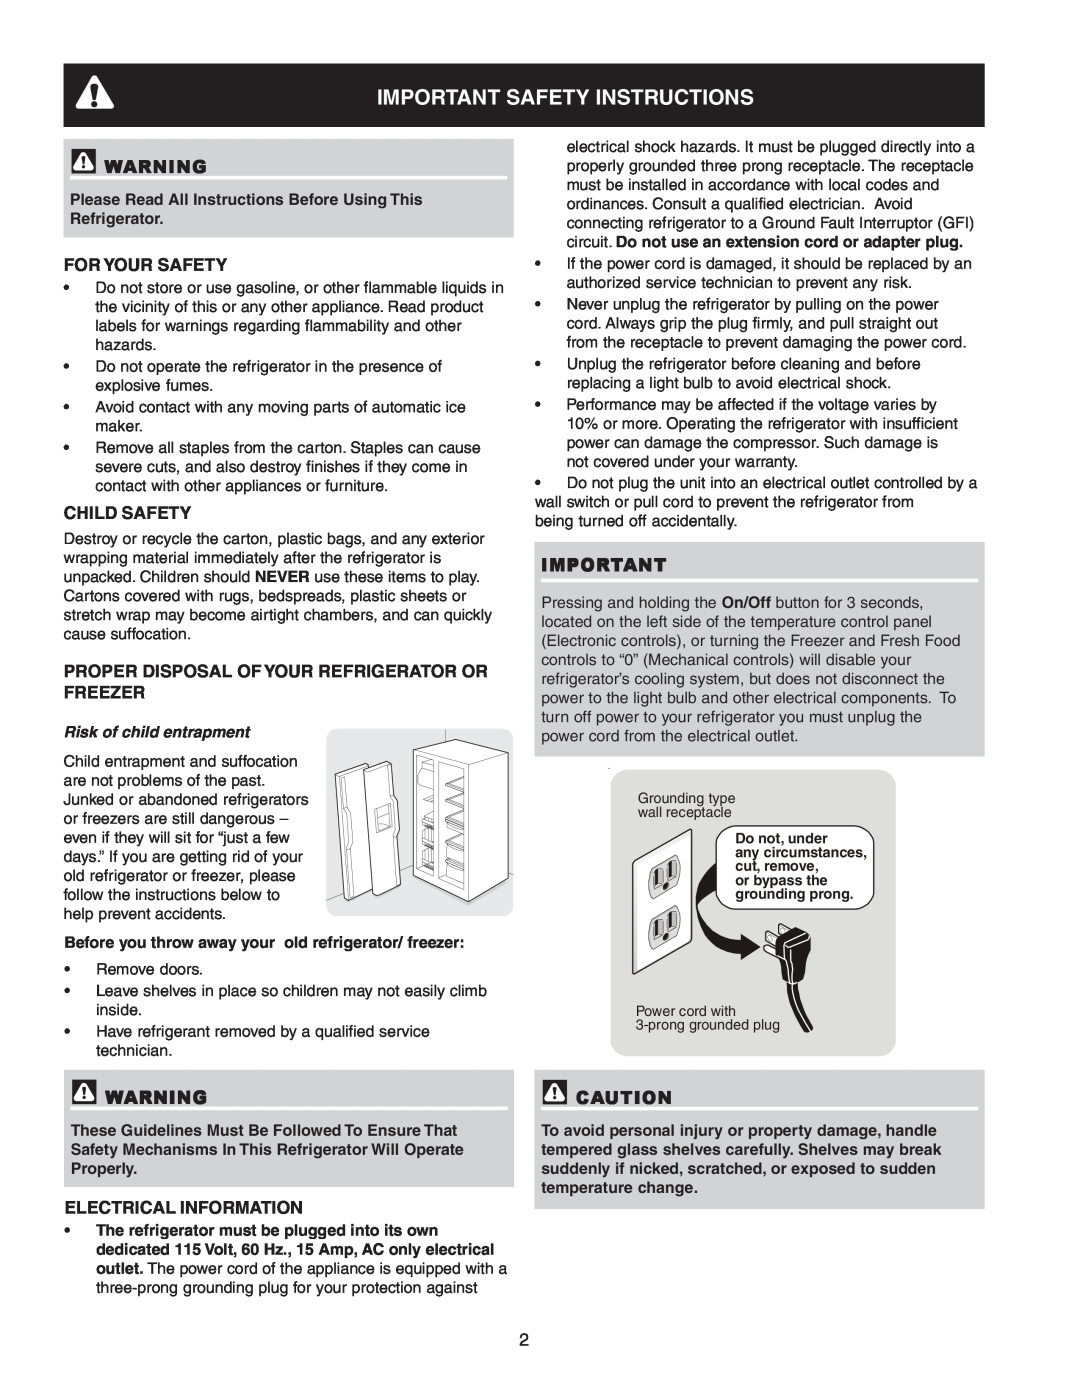 Frigidaire FRS6R3JW4 Important Safety Instructions, For Your Safety, Child Safety, Electrical Information 